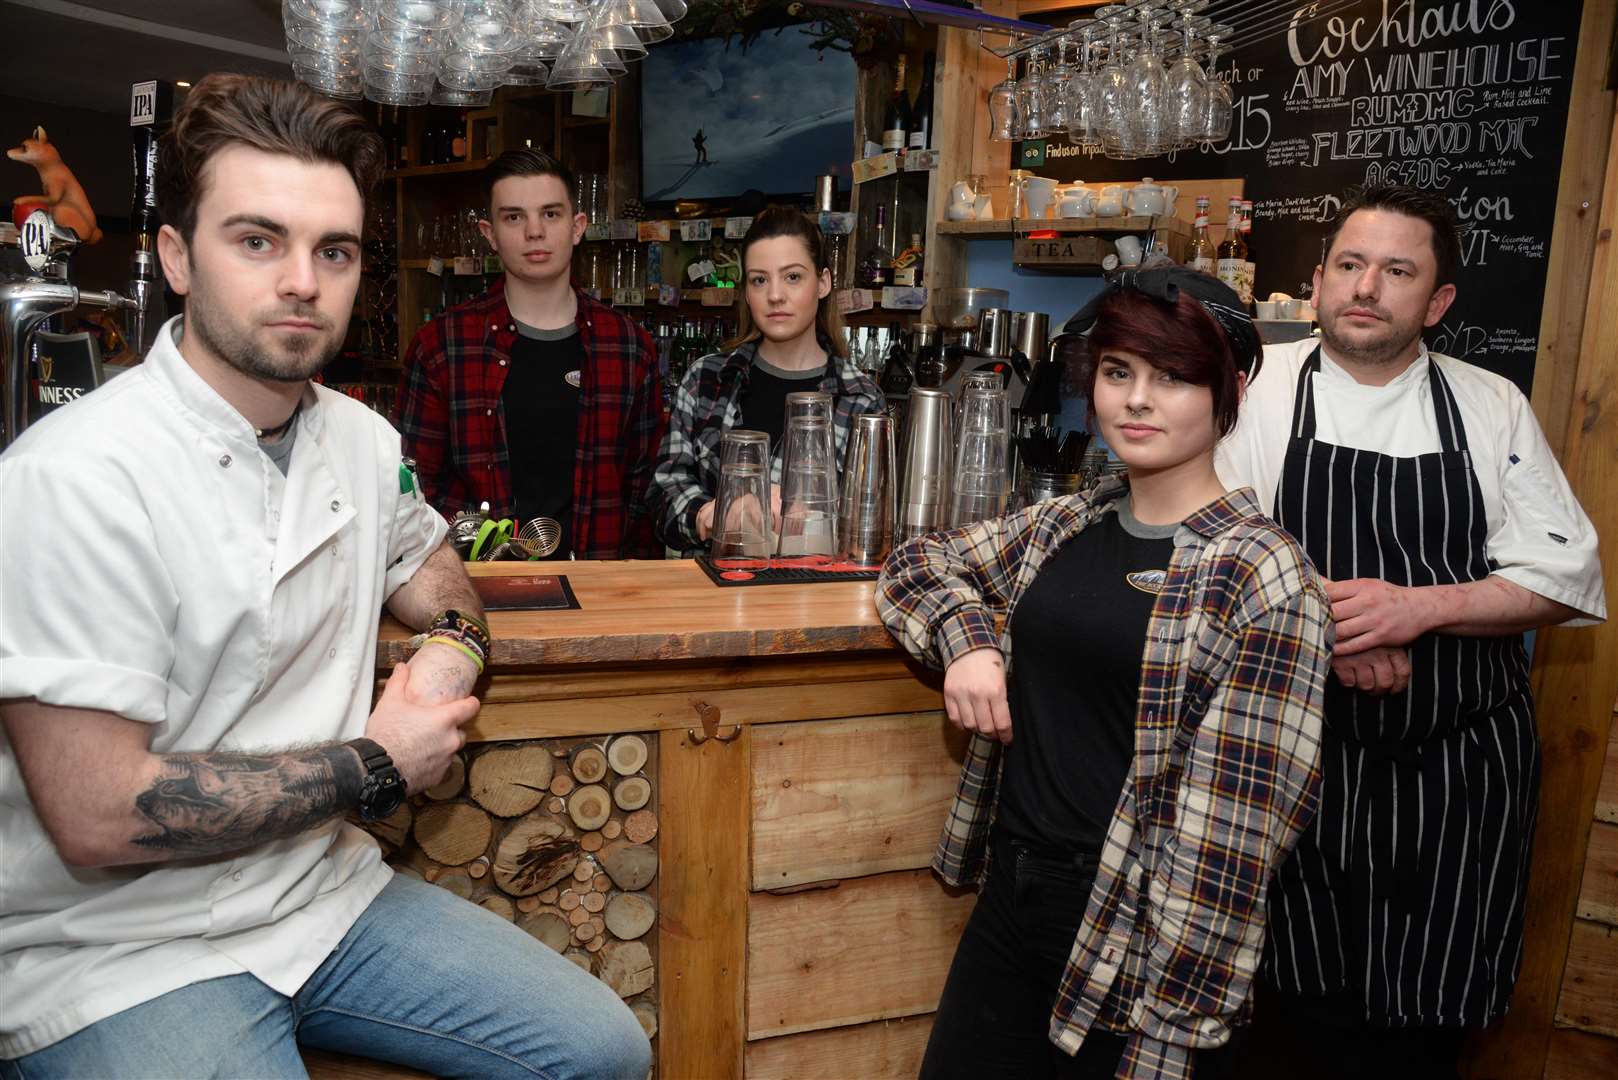 Staff at the Rock Lodge Restaraunt in Oxford Street, Whitstable, from where the charity pot was taken